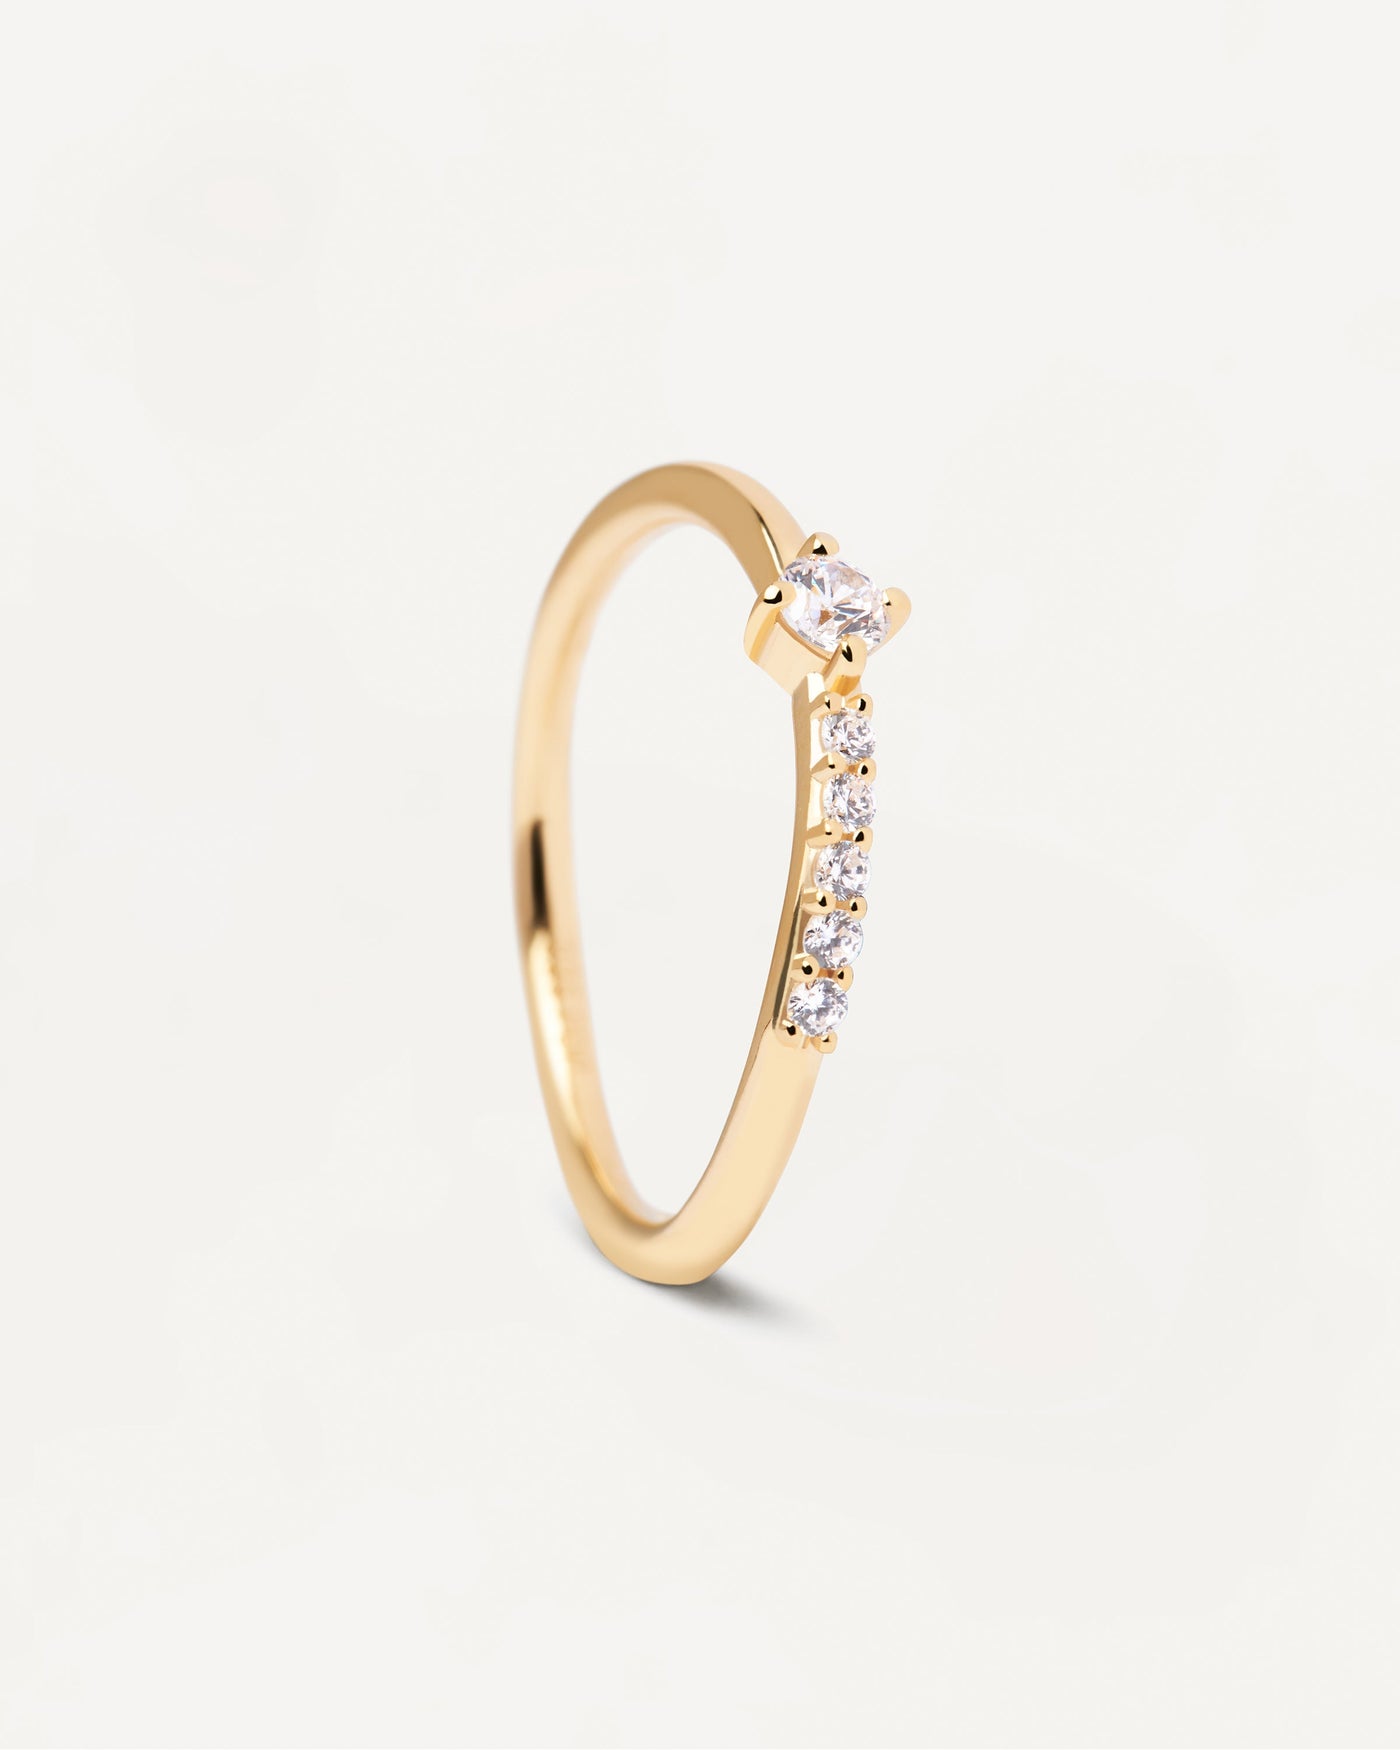 2023 Selection | Air Ring. Basic and elegant ring in gold-plated silver with white crystals. Get the latest arrival from PDPAOLA. Place your order safely and get this Best Seller. Free Shipping.